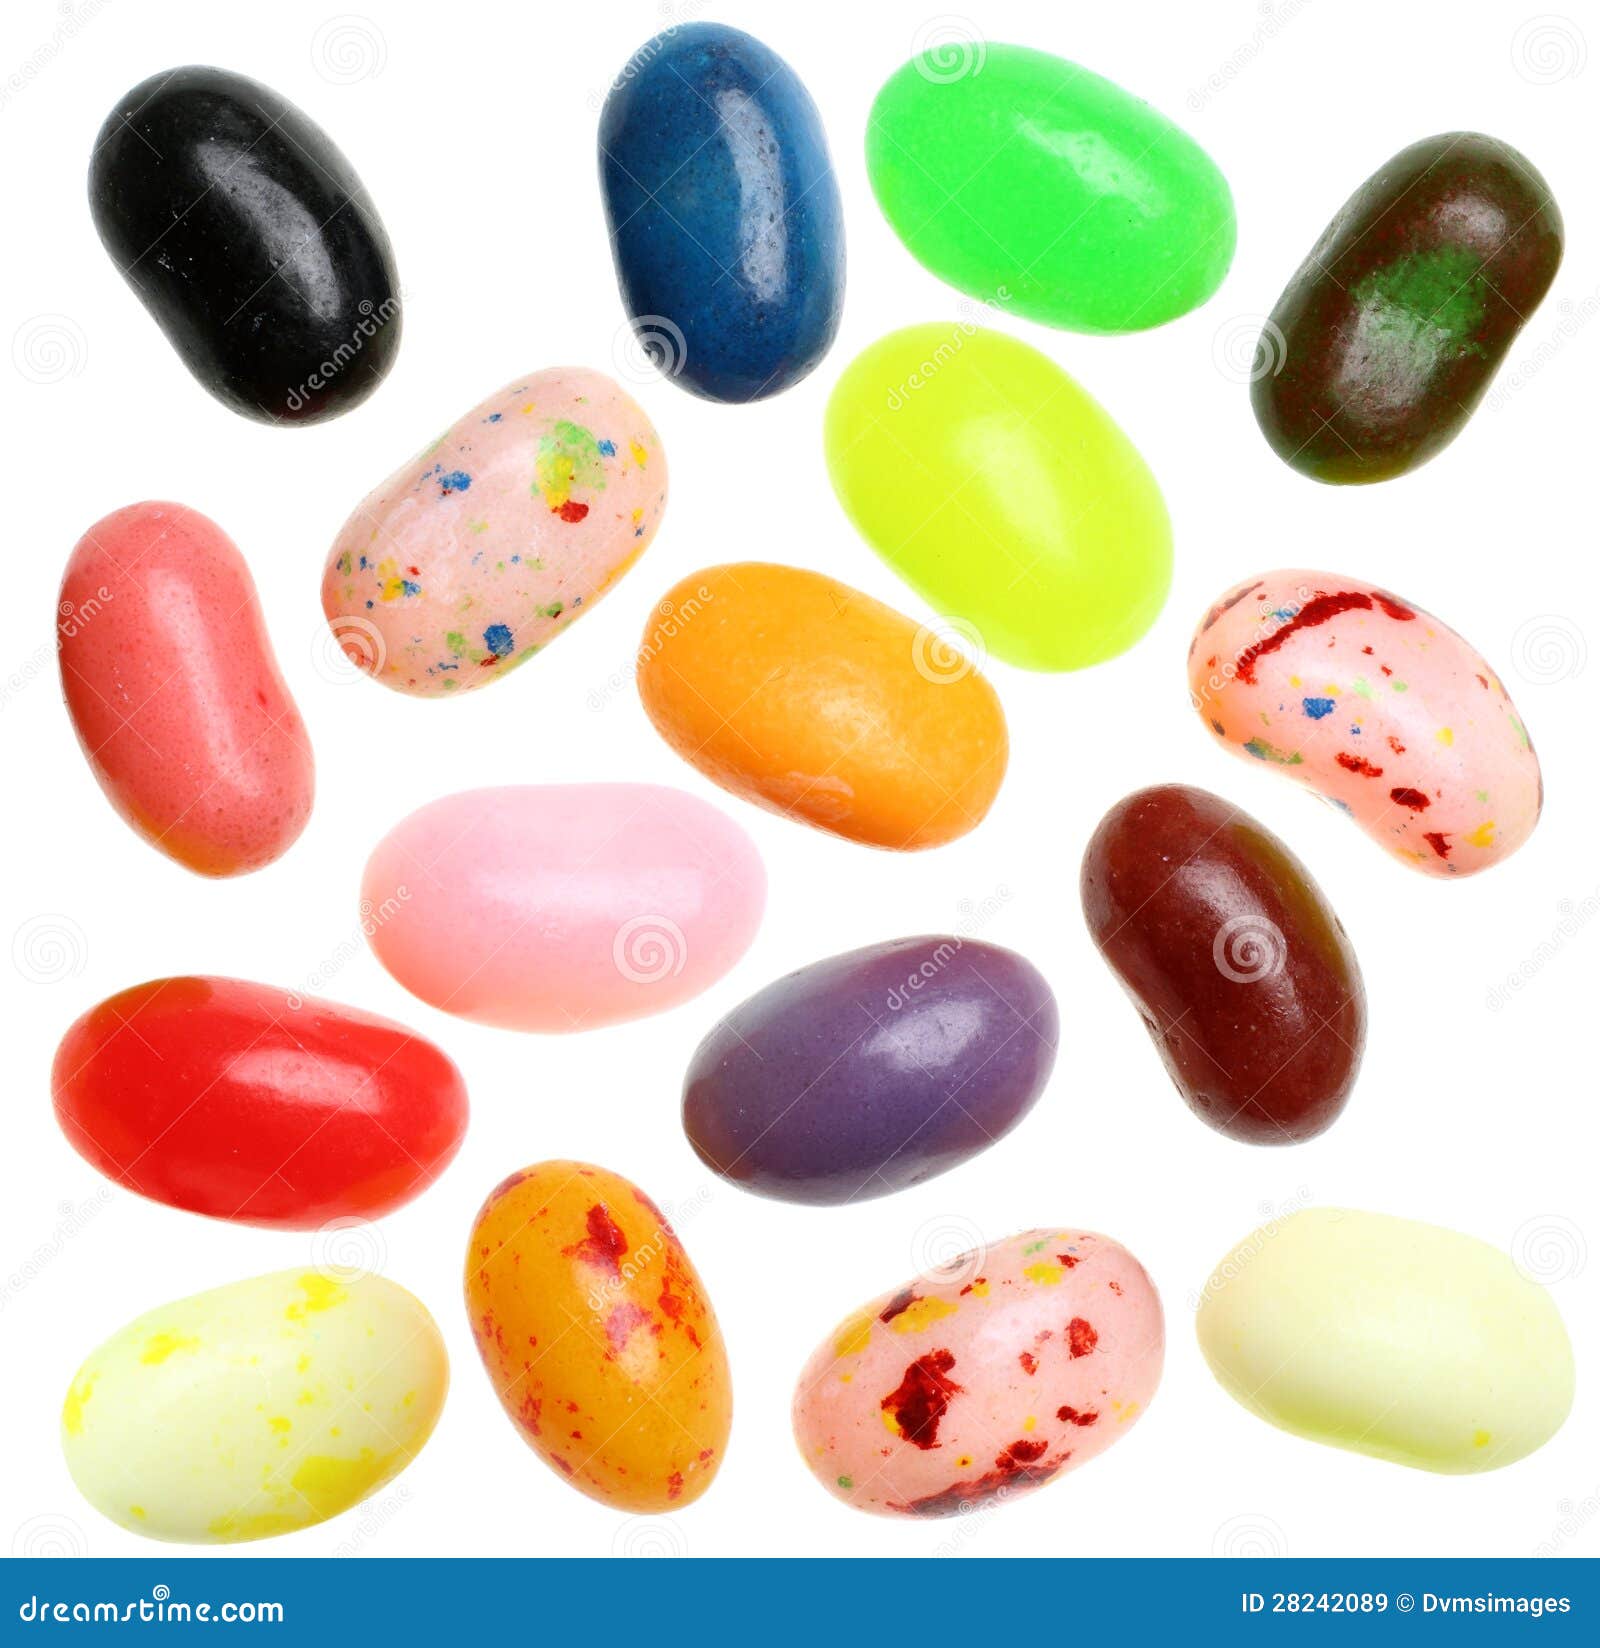  jelly beans